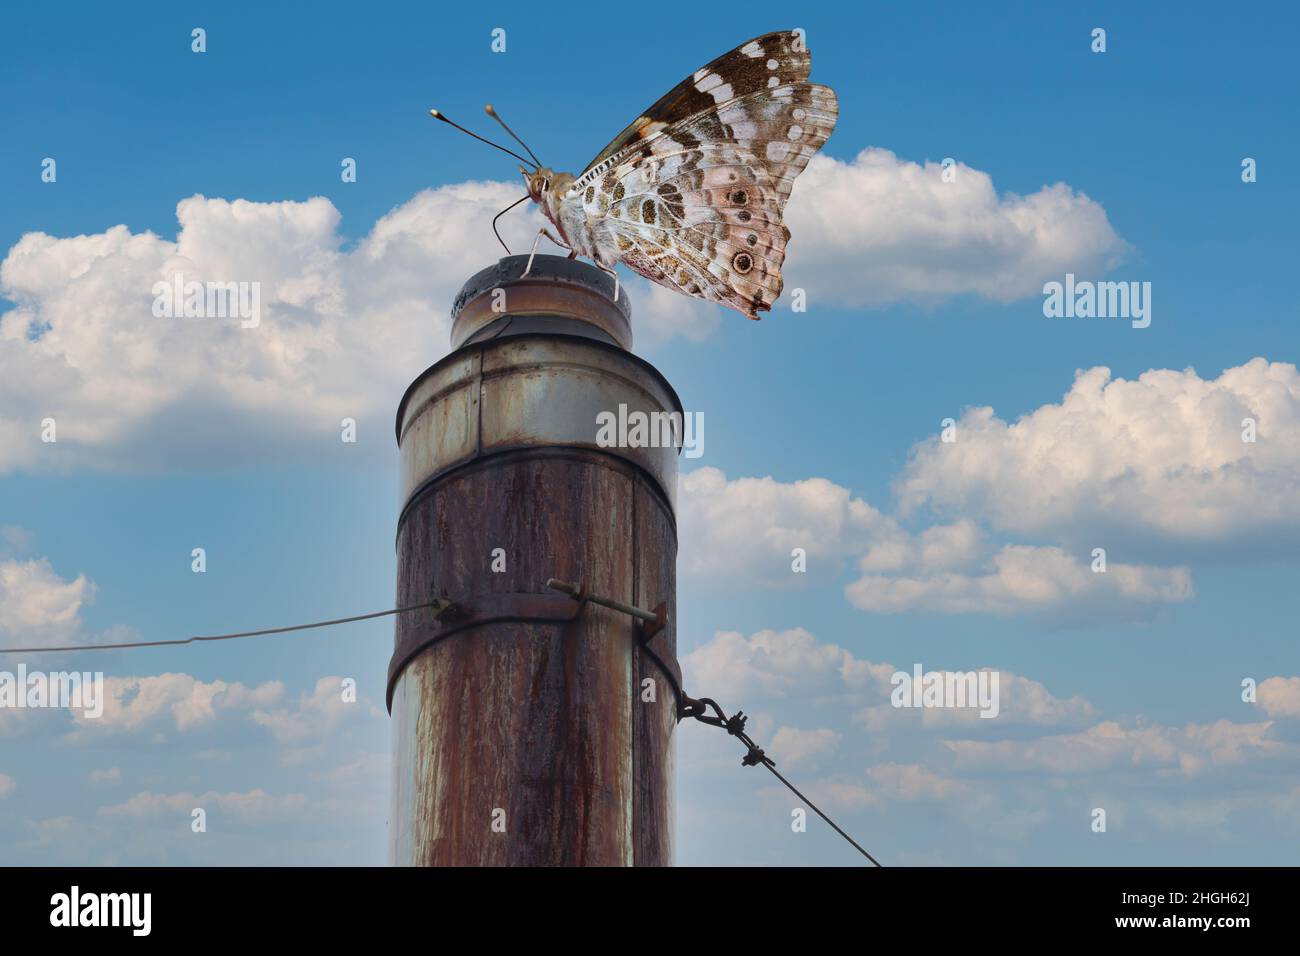 The butterfly sits on the chimney. Clean air concept. Stock Photo